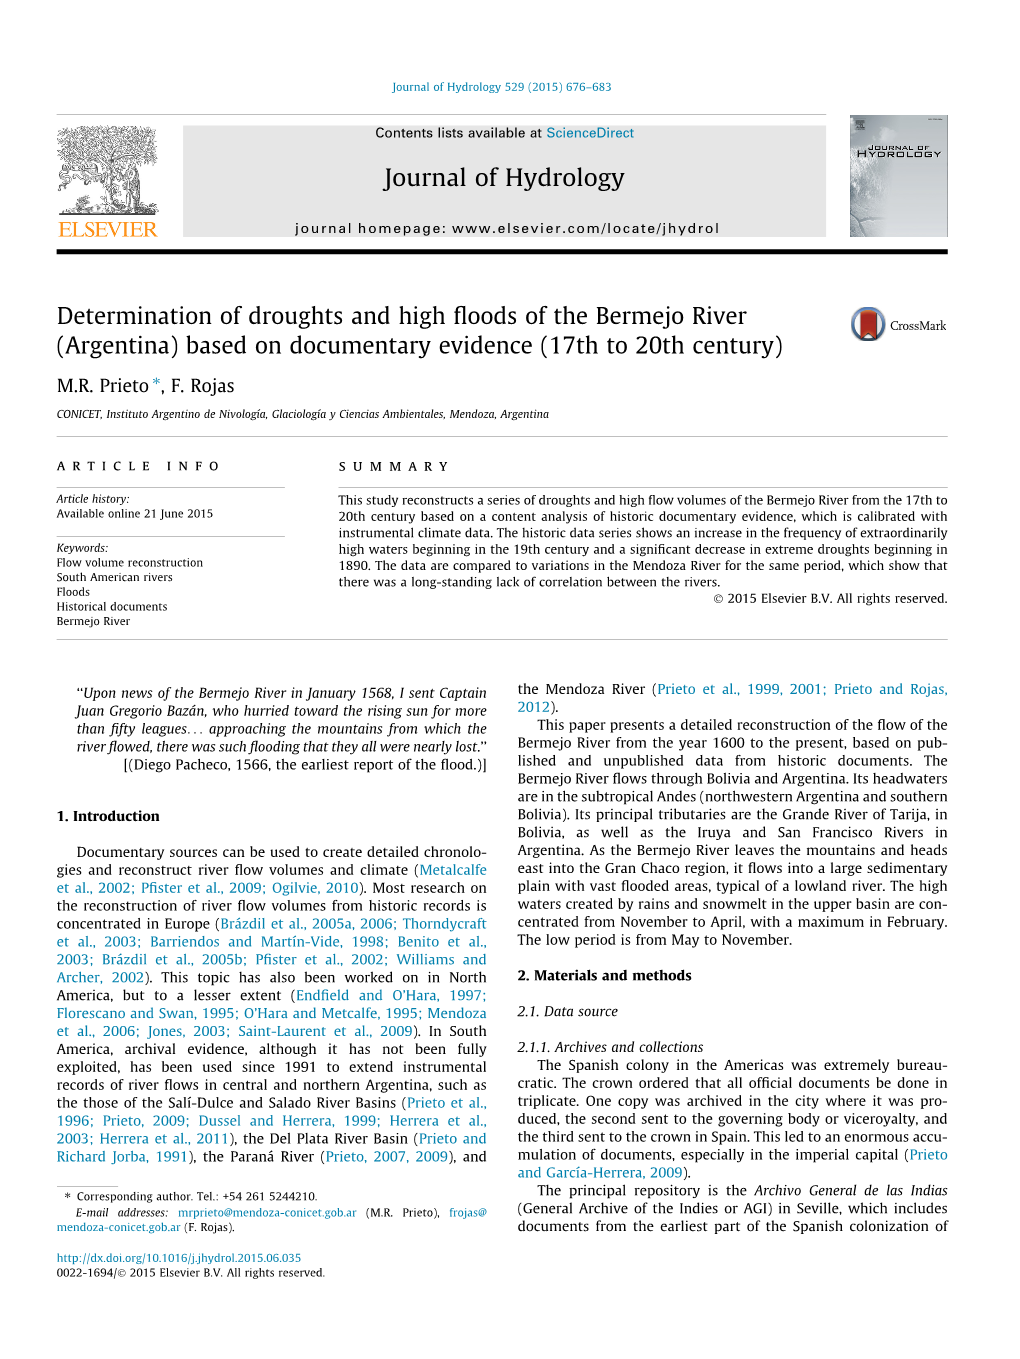 Determination of Droughts and High Floods of the Bermejo River (Argentina) Based on Documentary Evidence (17Th to 20Th Century)